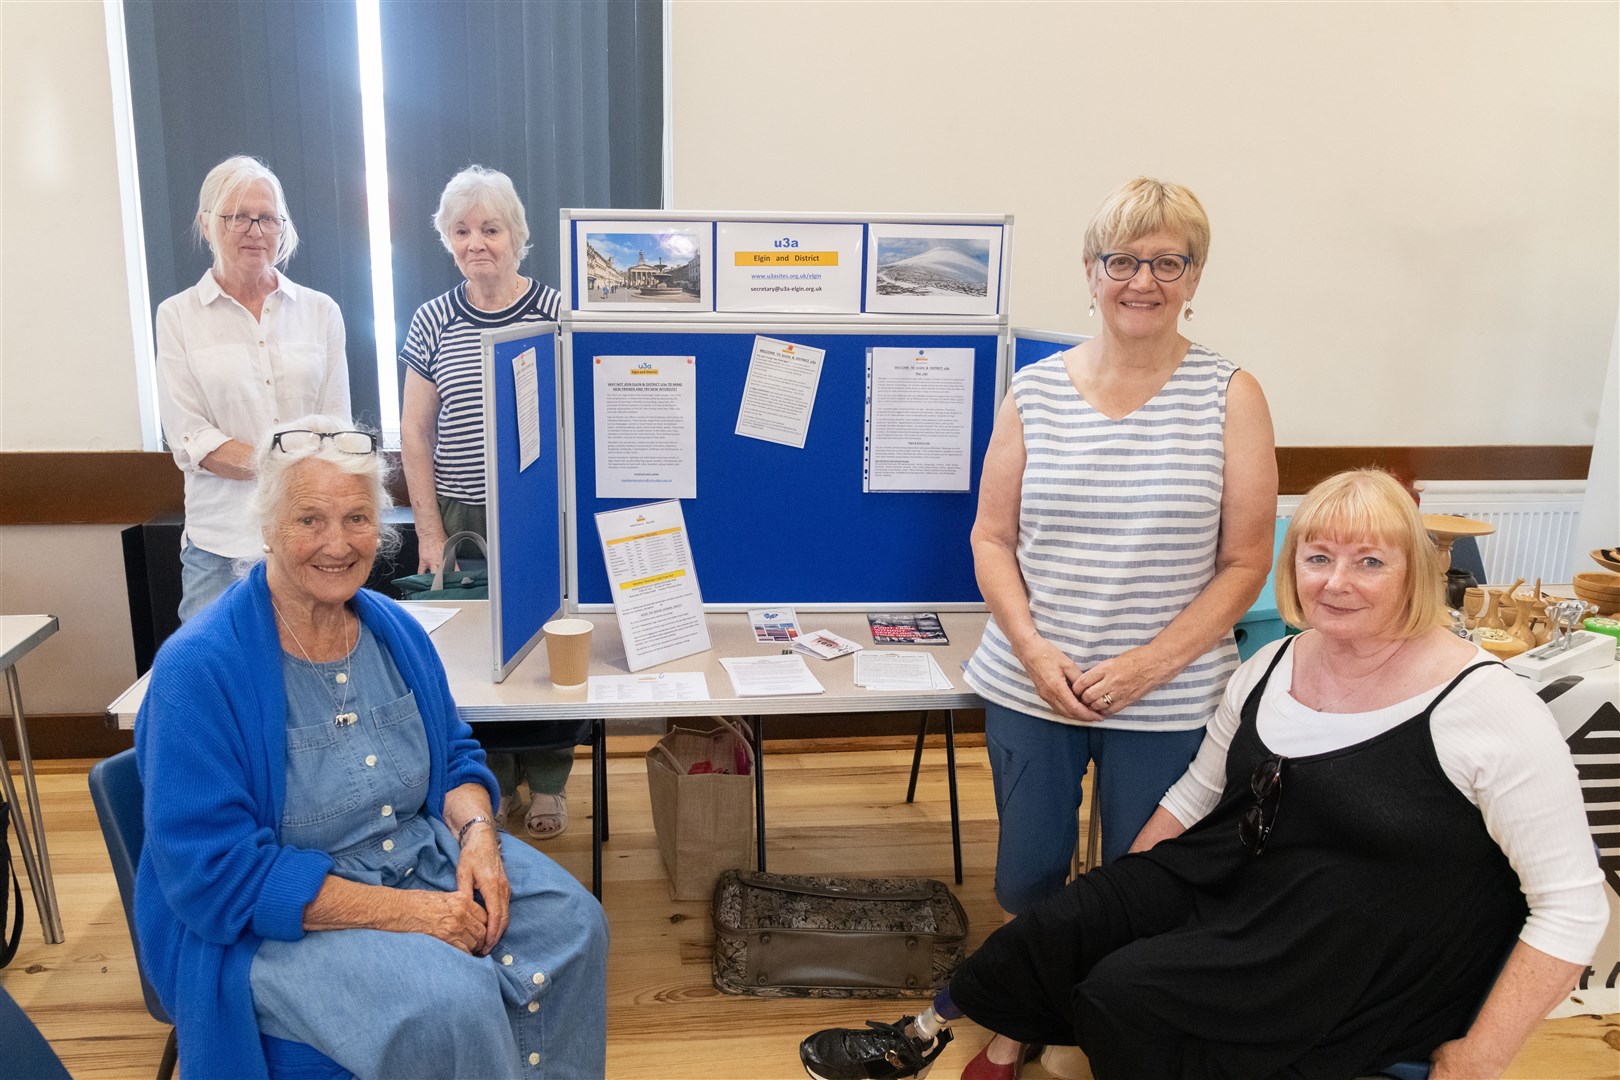 From left: Heather MacLennan, Rosie Hales-Tooke, Joan Bremner, Kate Heneghan and Patsy Gowans promoting Elgin and District u3a at the New Elgin community showcase. Picture: Beth Taylor